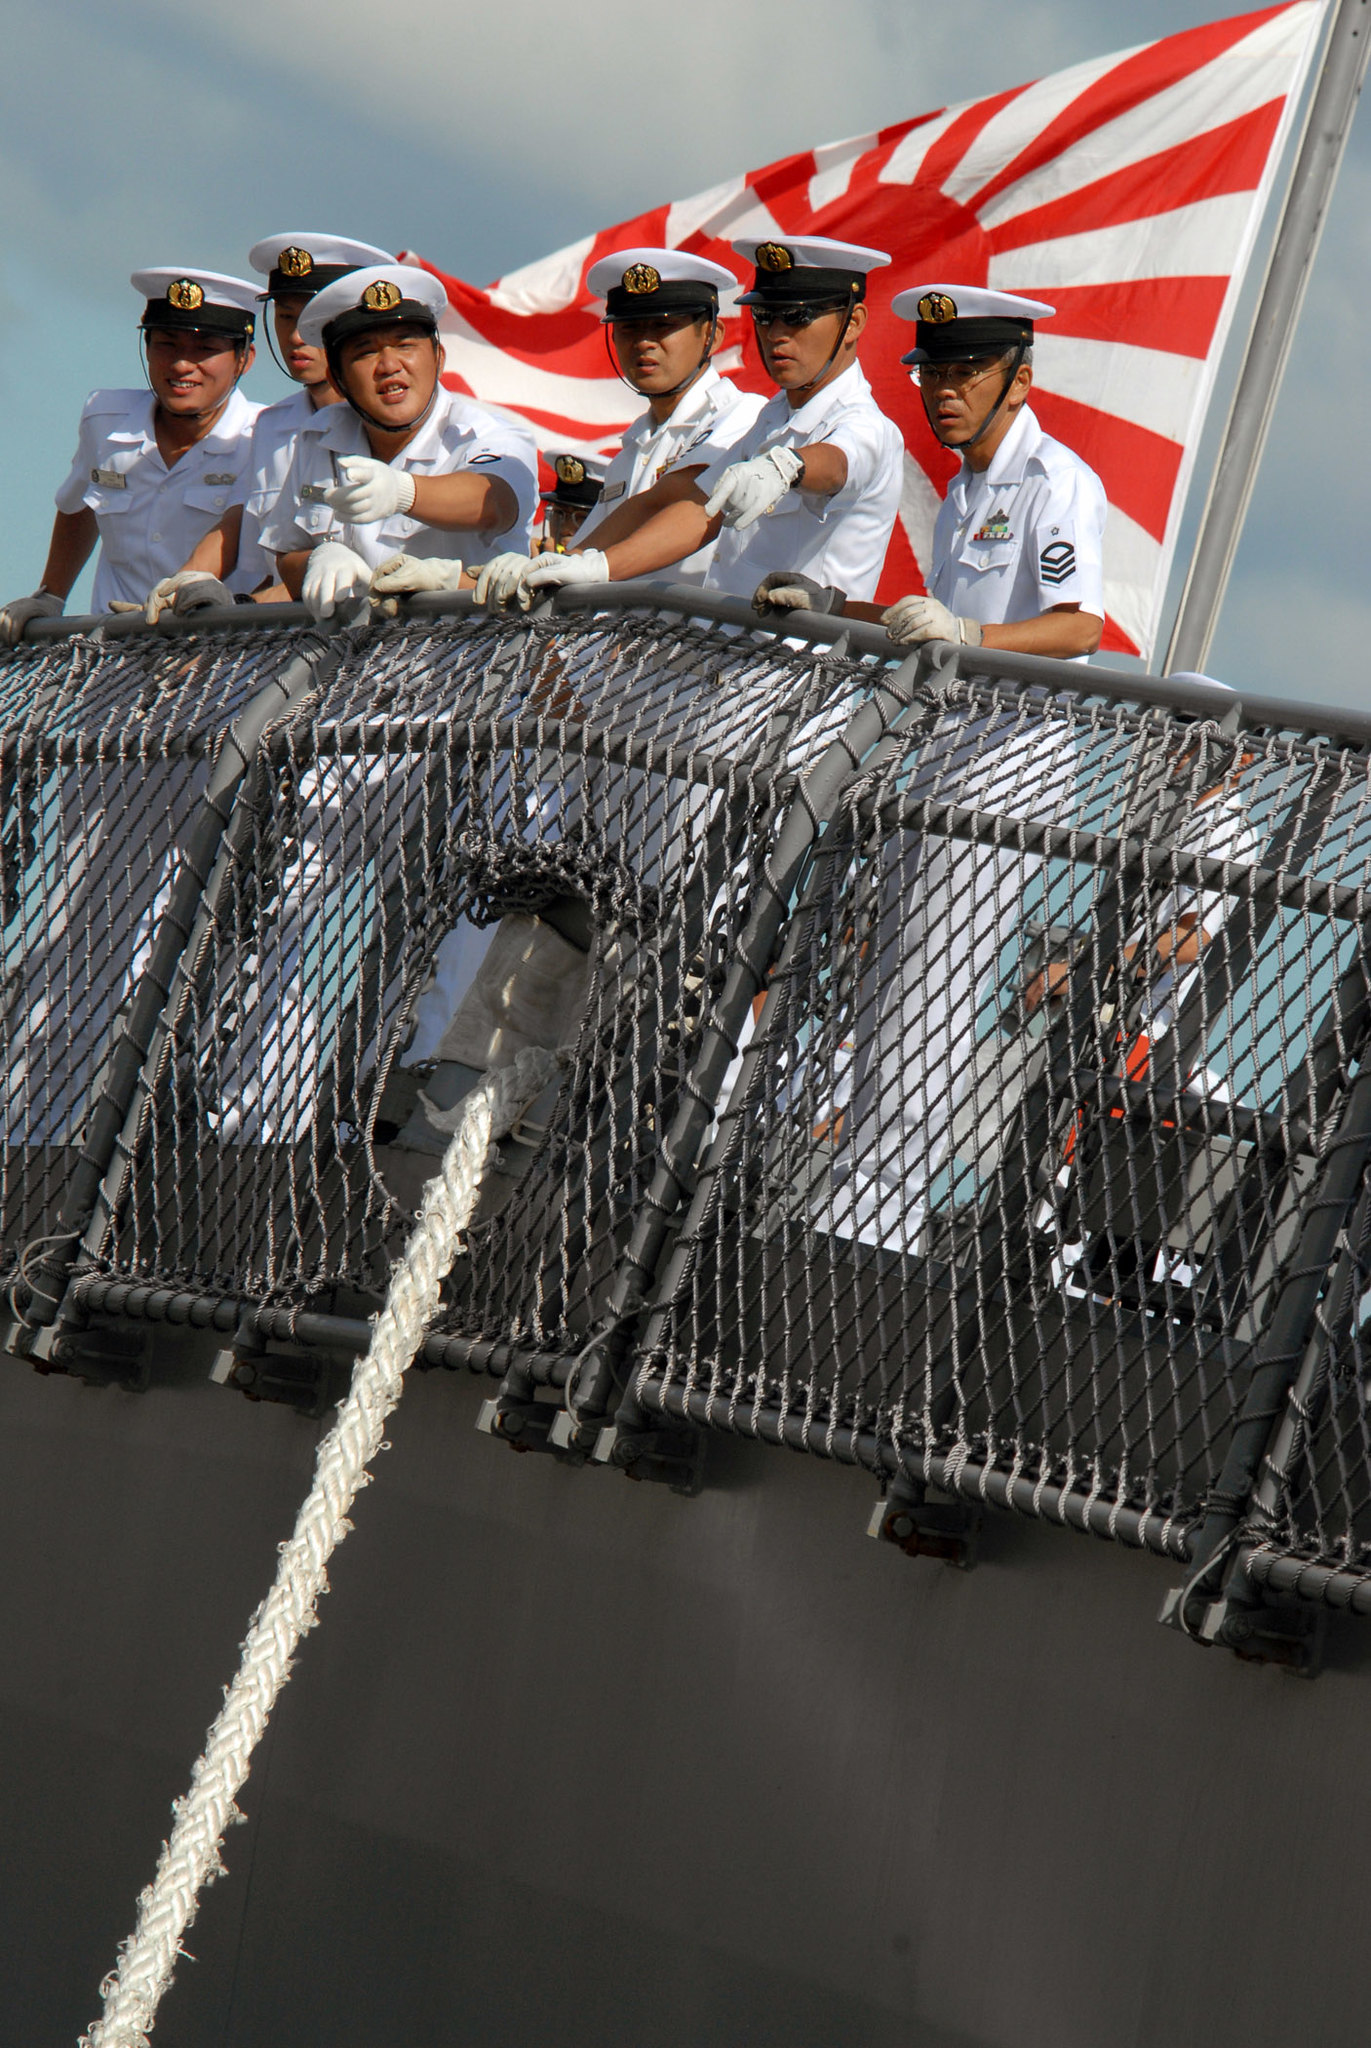 Japanese sailors on board JS KONGO (DDG 173) watch pier-side line handlers as the ship moors pierside Naval Station Pearl Harbor. Currently in Pearl Harbor, KONGO is the first Japanese ship with the capability to detect, track and intercept short to medium range ballistic missiles. Later this year, KONGO will conduct a flight test, designated Japan Flight Test Mission-1, at Pacific Missile Range Facility, Hawaii. U.S. Navy photo by Mass Communication Specialist 1st Class James E. Foehl (RELEASED)